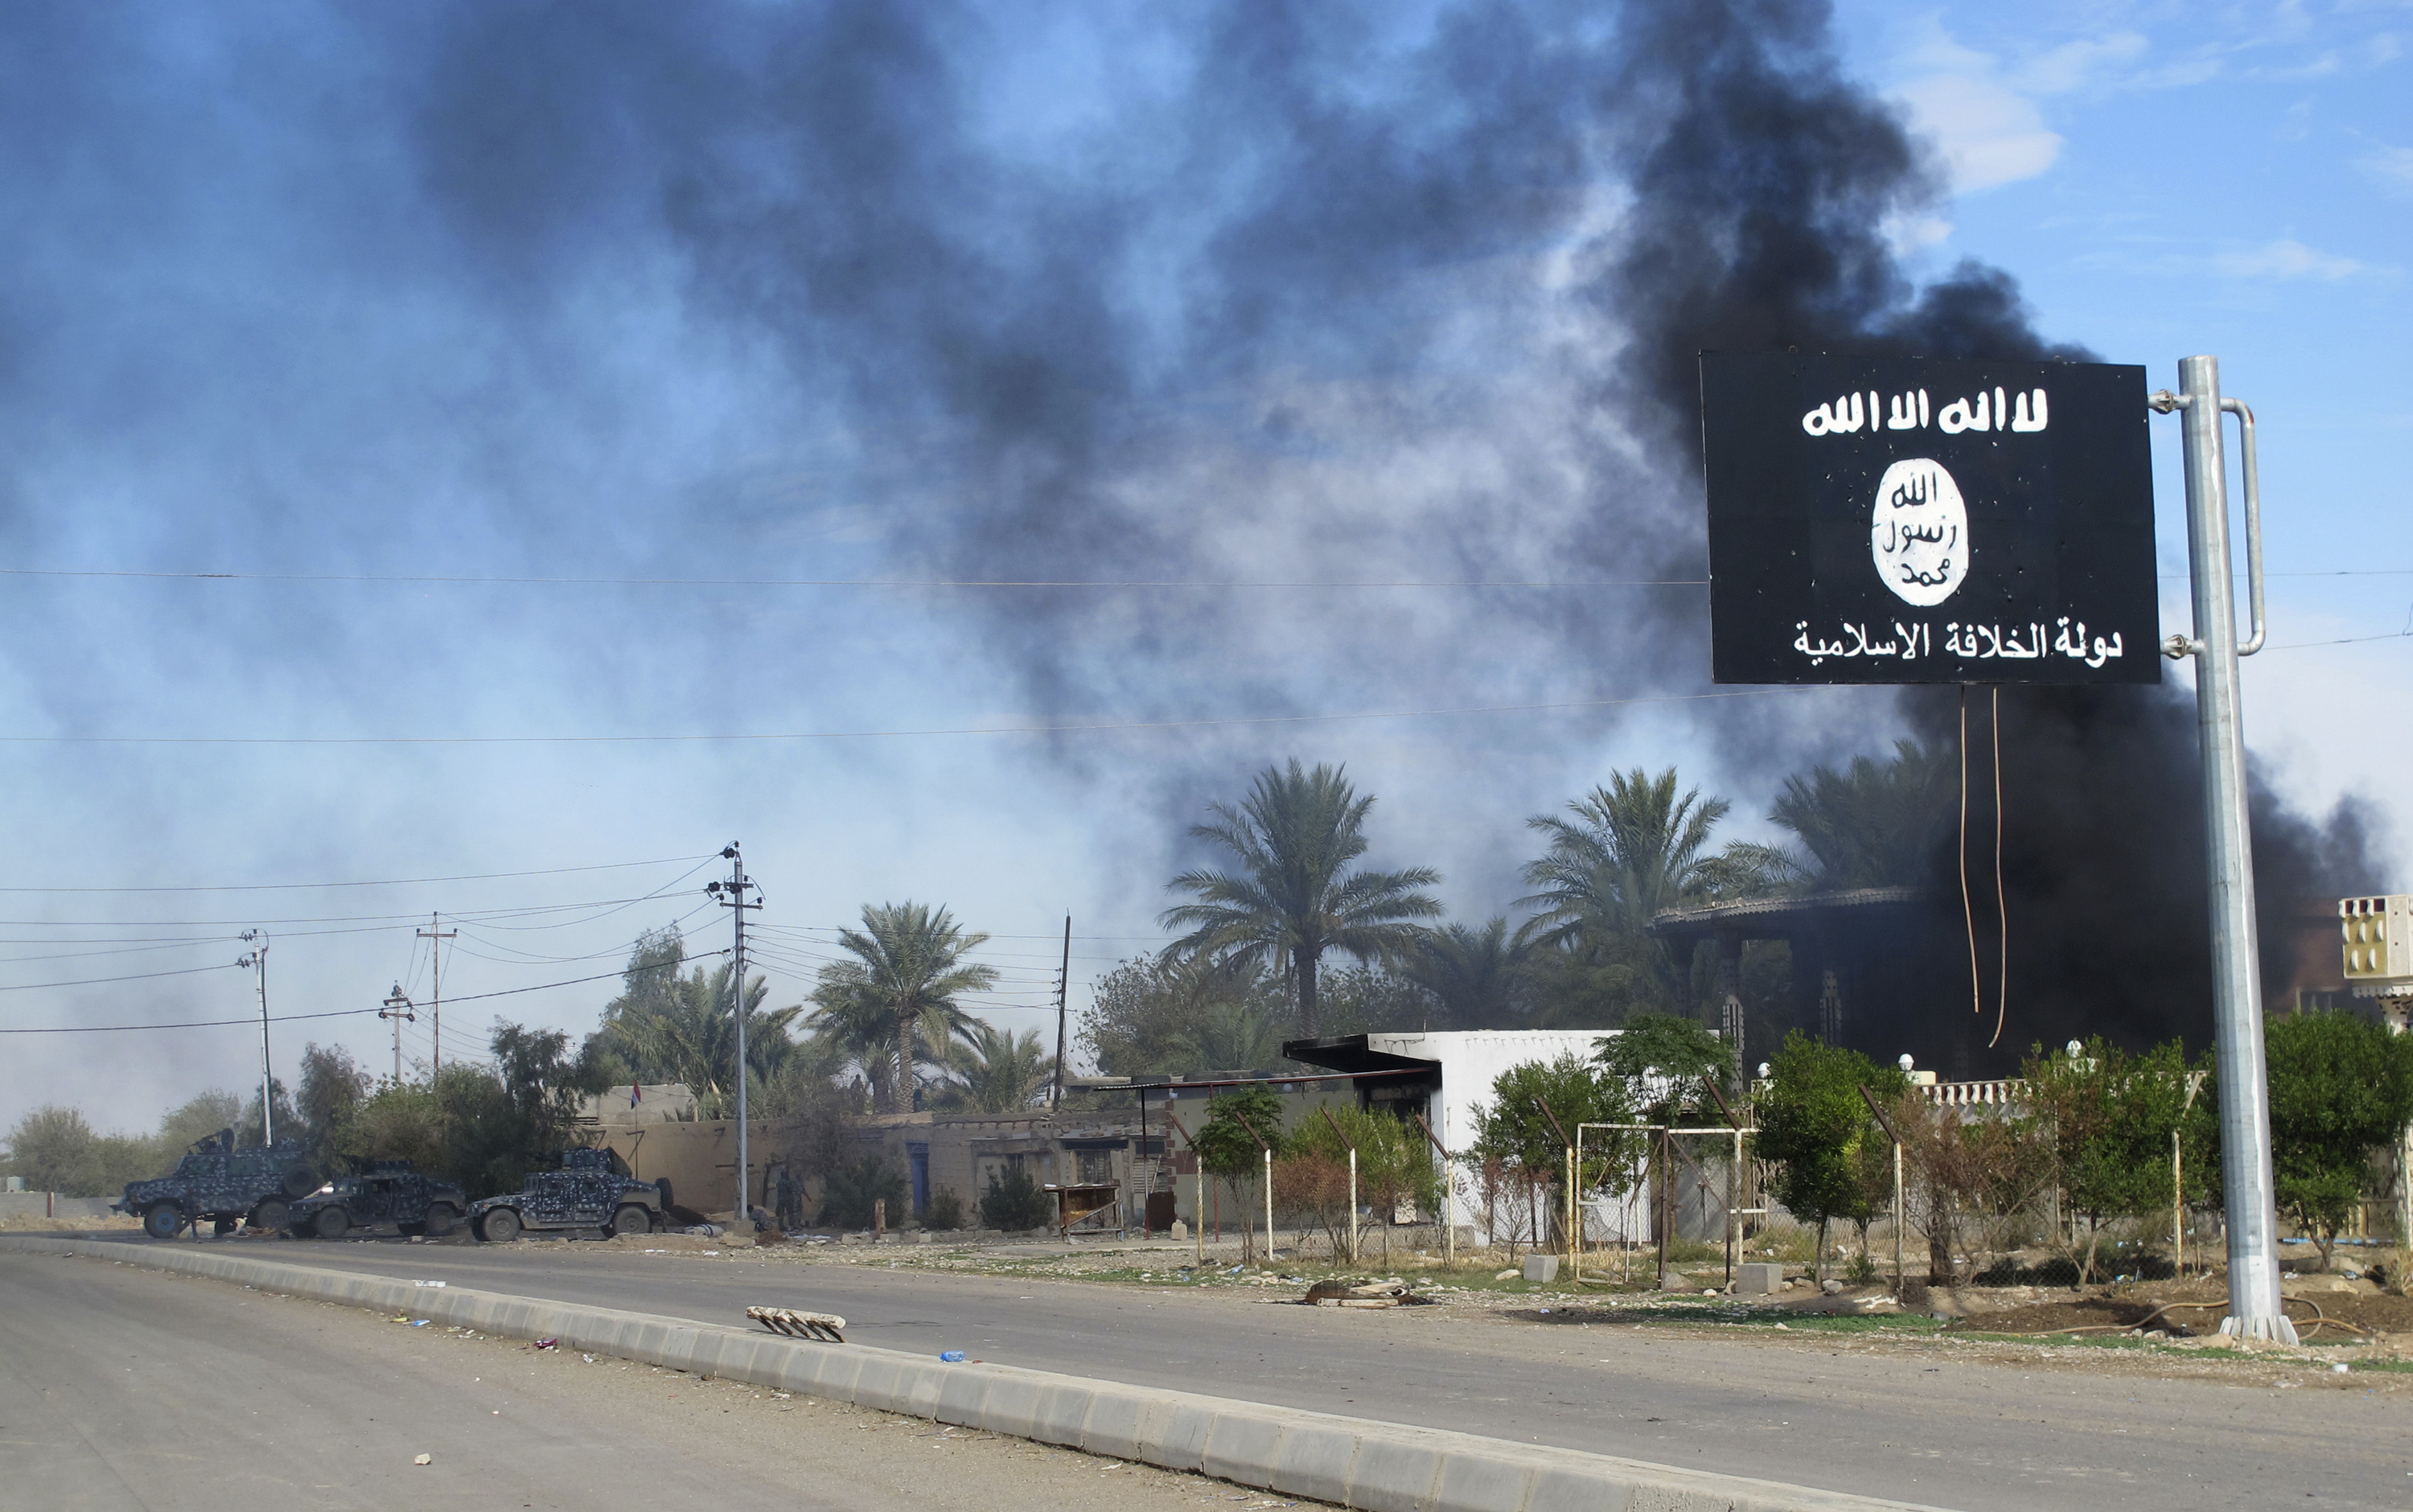 Smoke raises behind an Islamic State of Iraq and Greater Syria flag after Iraqi security forces and Shi‘ite fighters took control of Saadiya in Diyala province from ISIS militants on Nov. 24, 2014 (Stringer—Reuters)